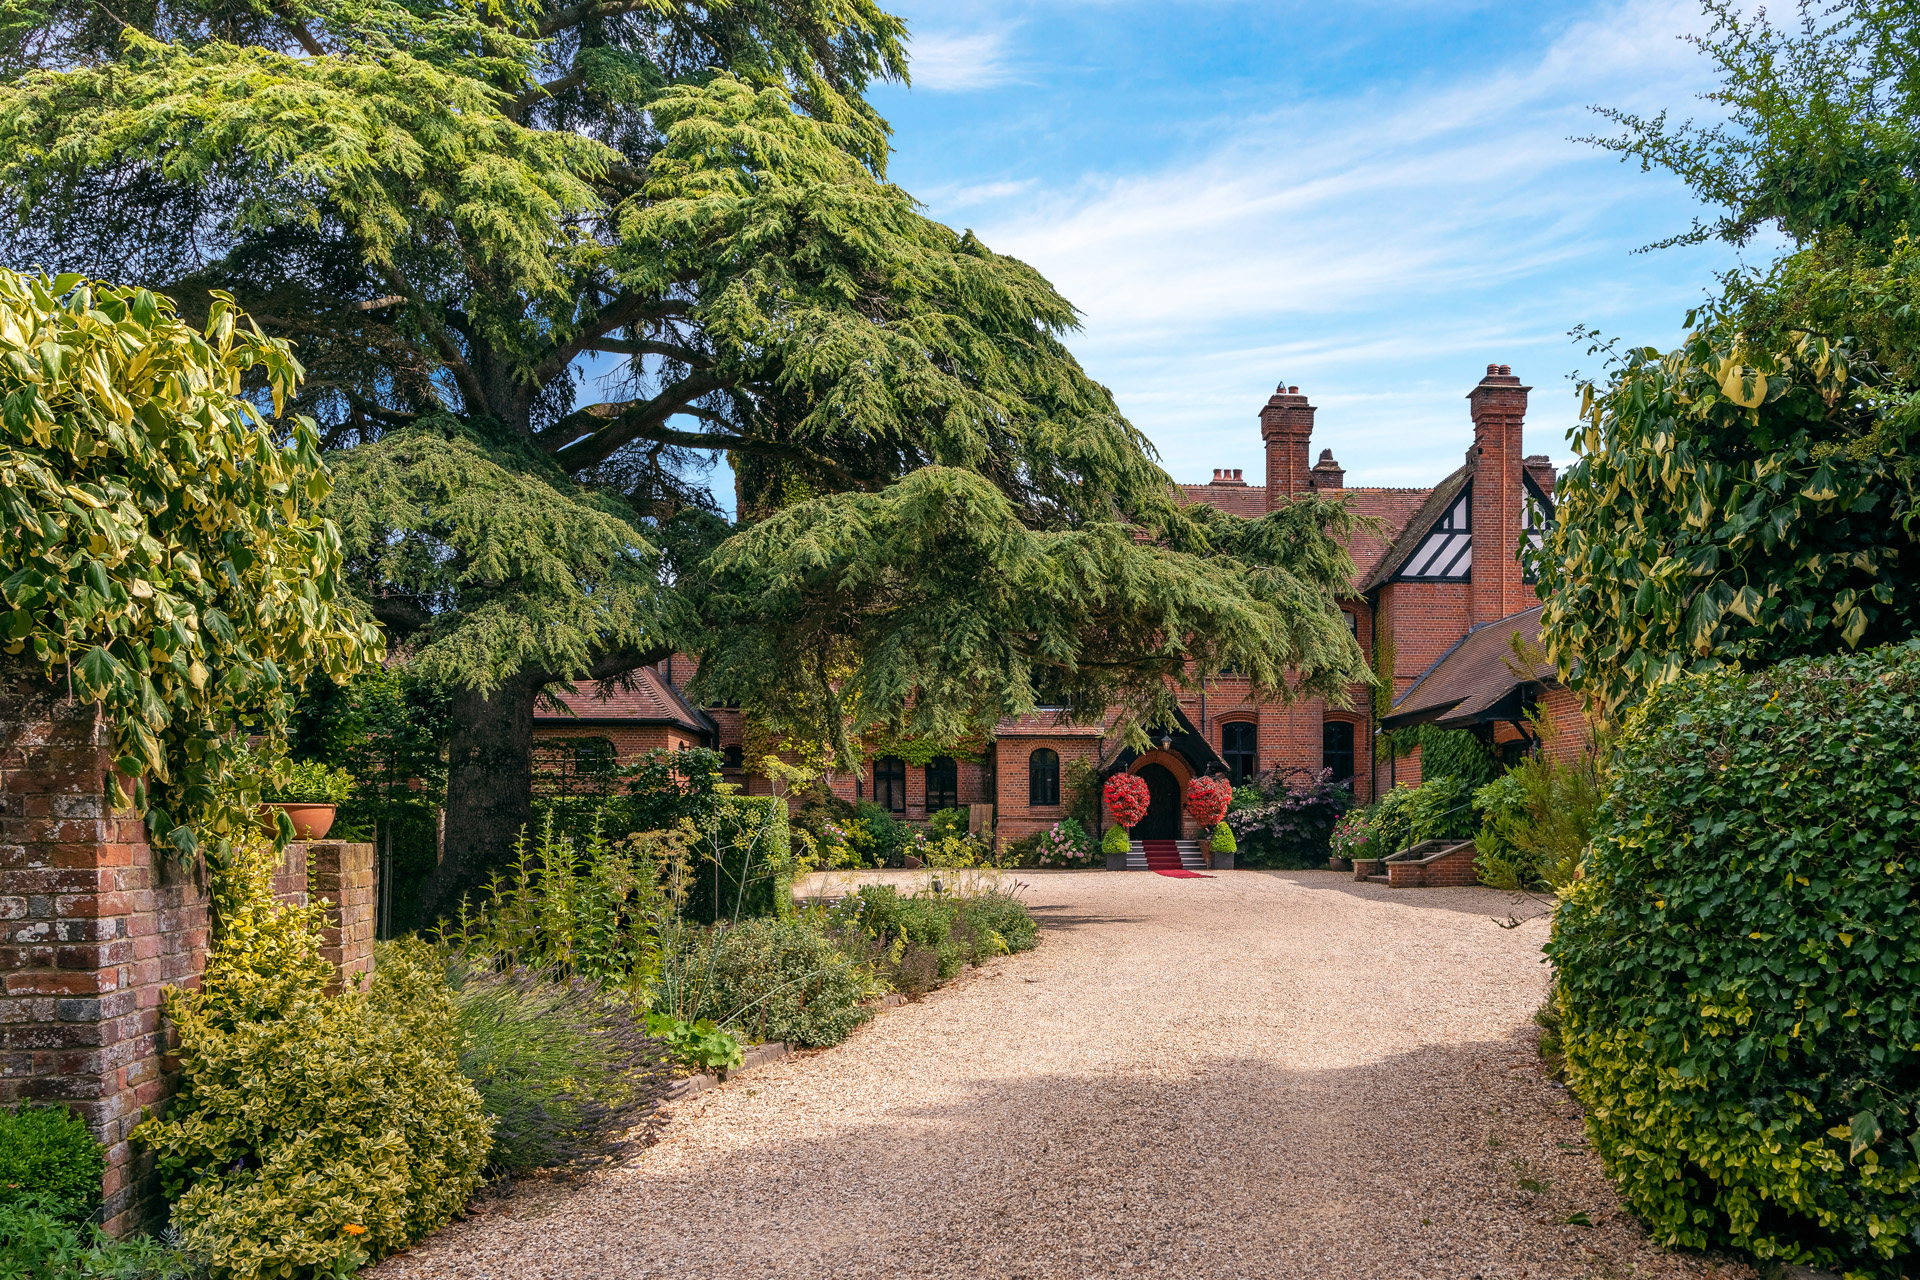 Careys Manor in the New Forest